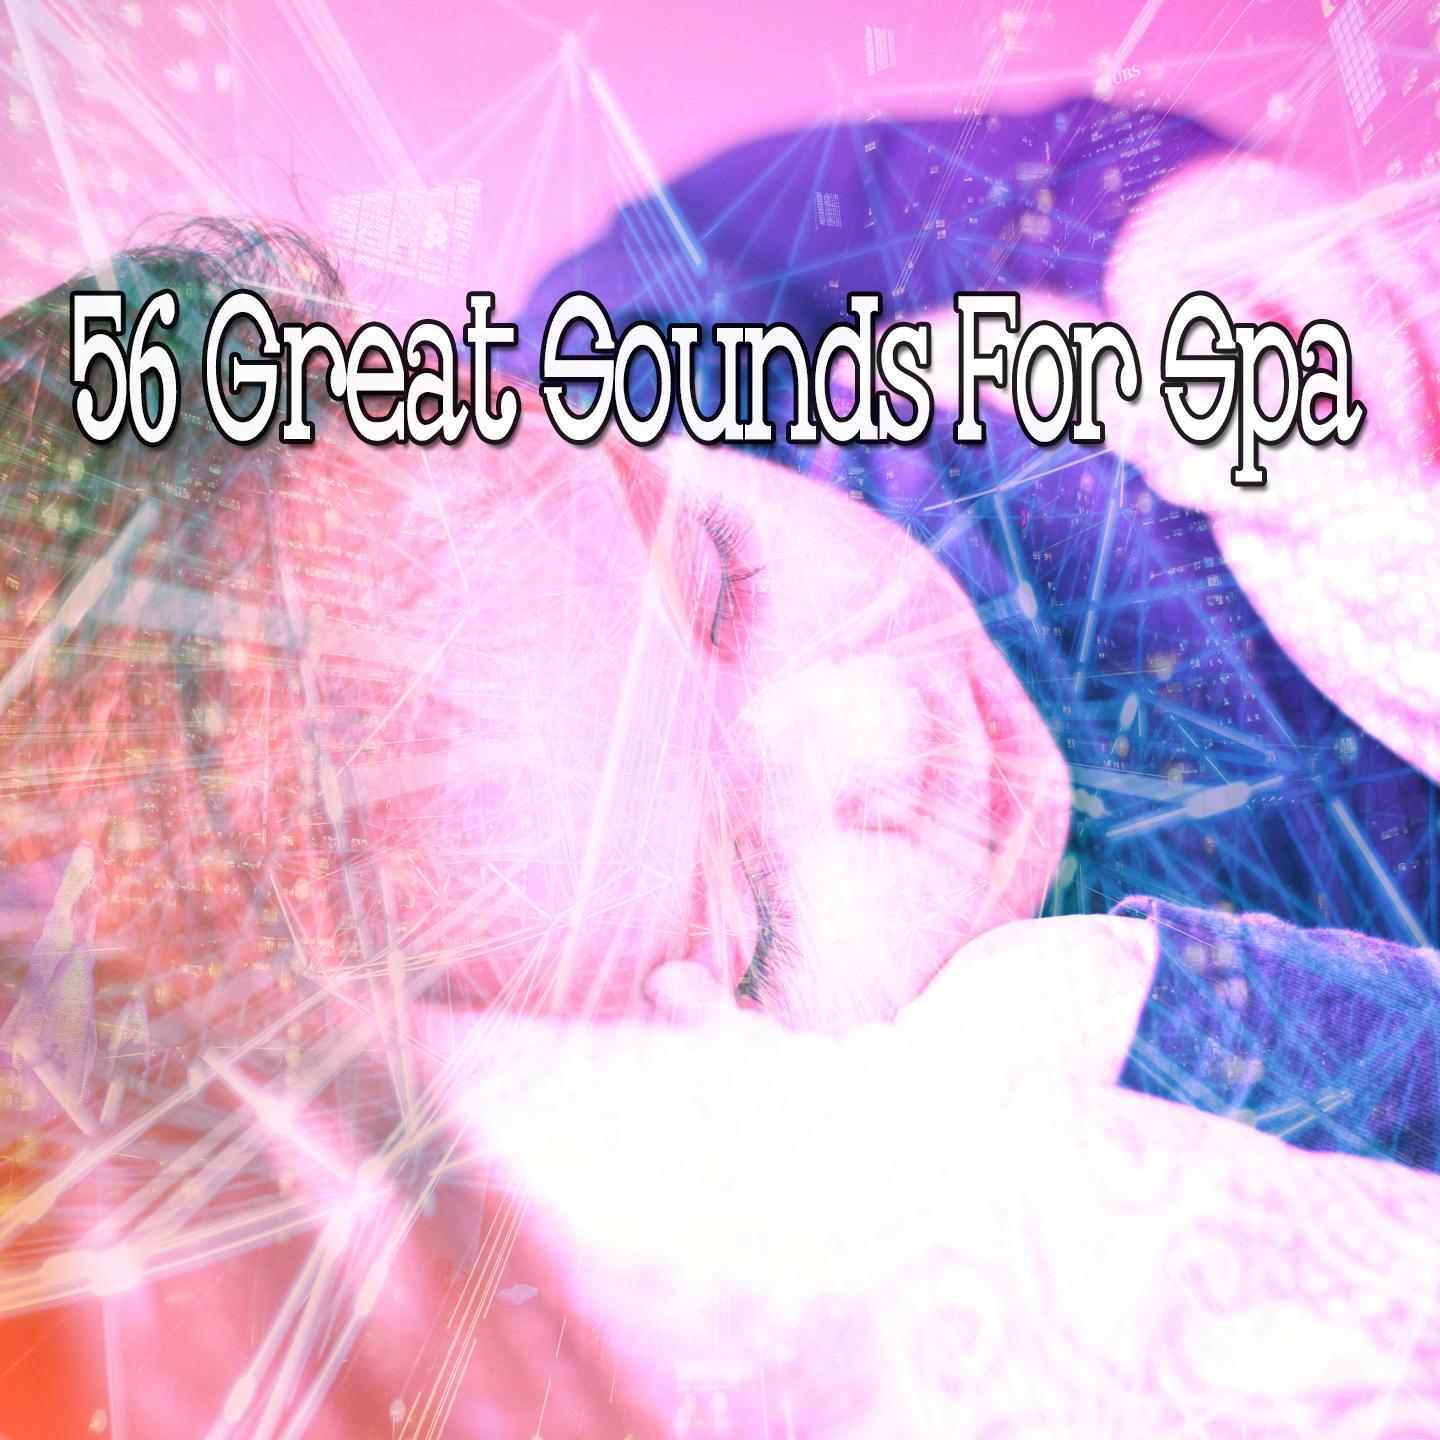 56 Great Sounds for Spa